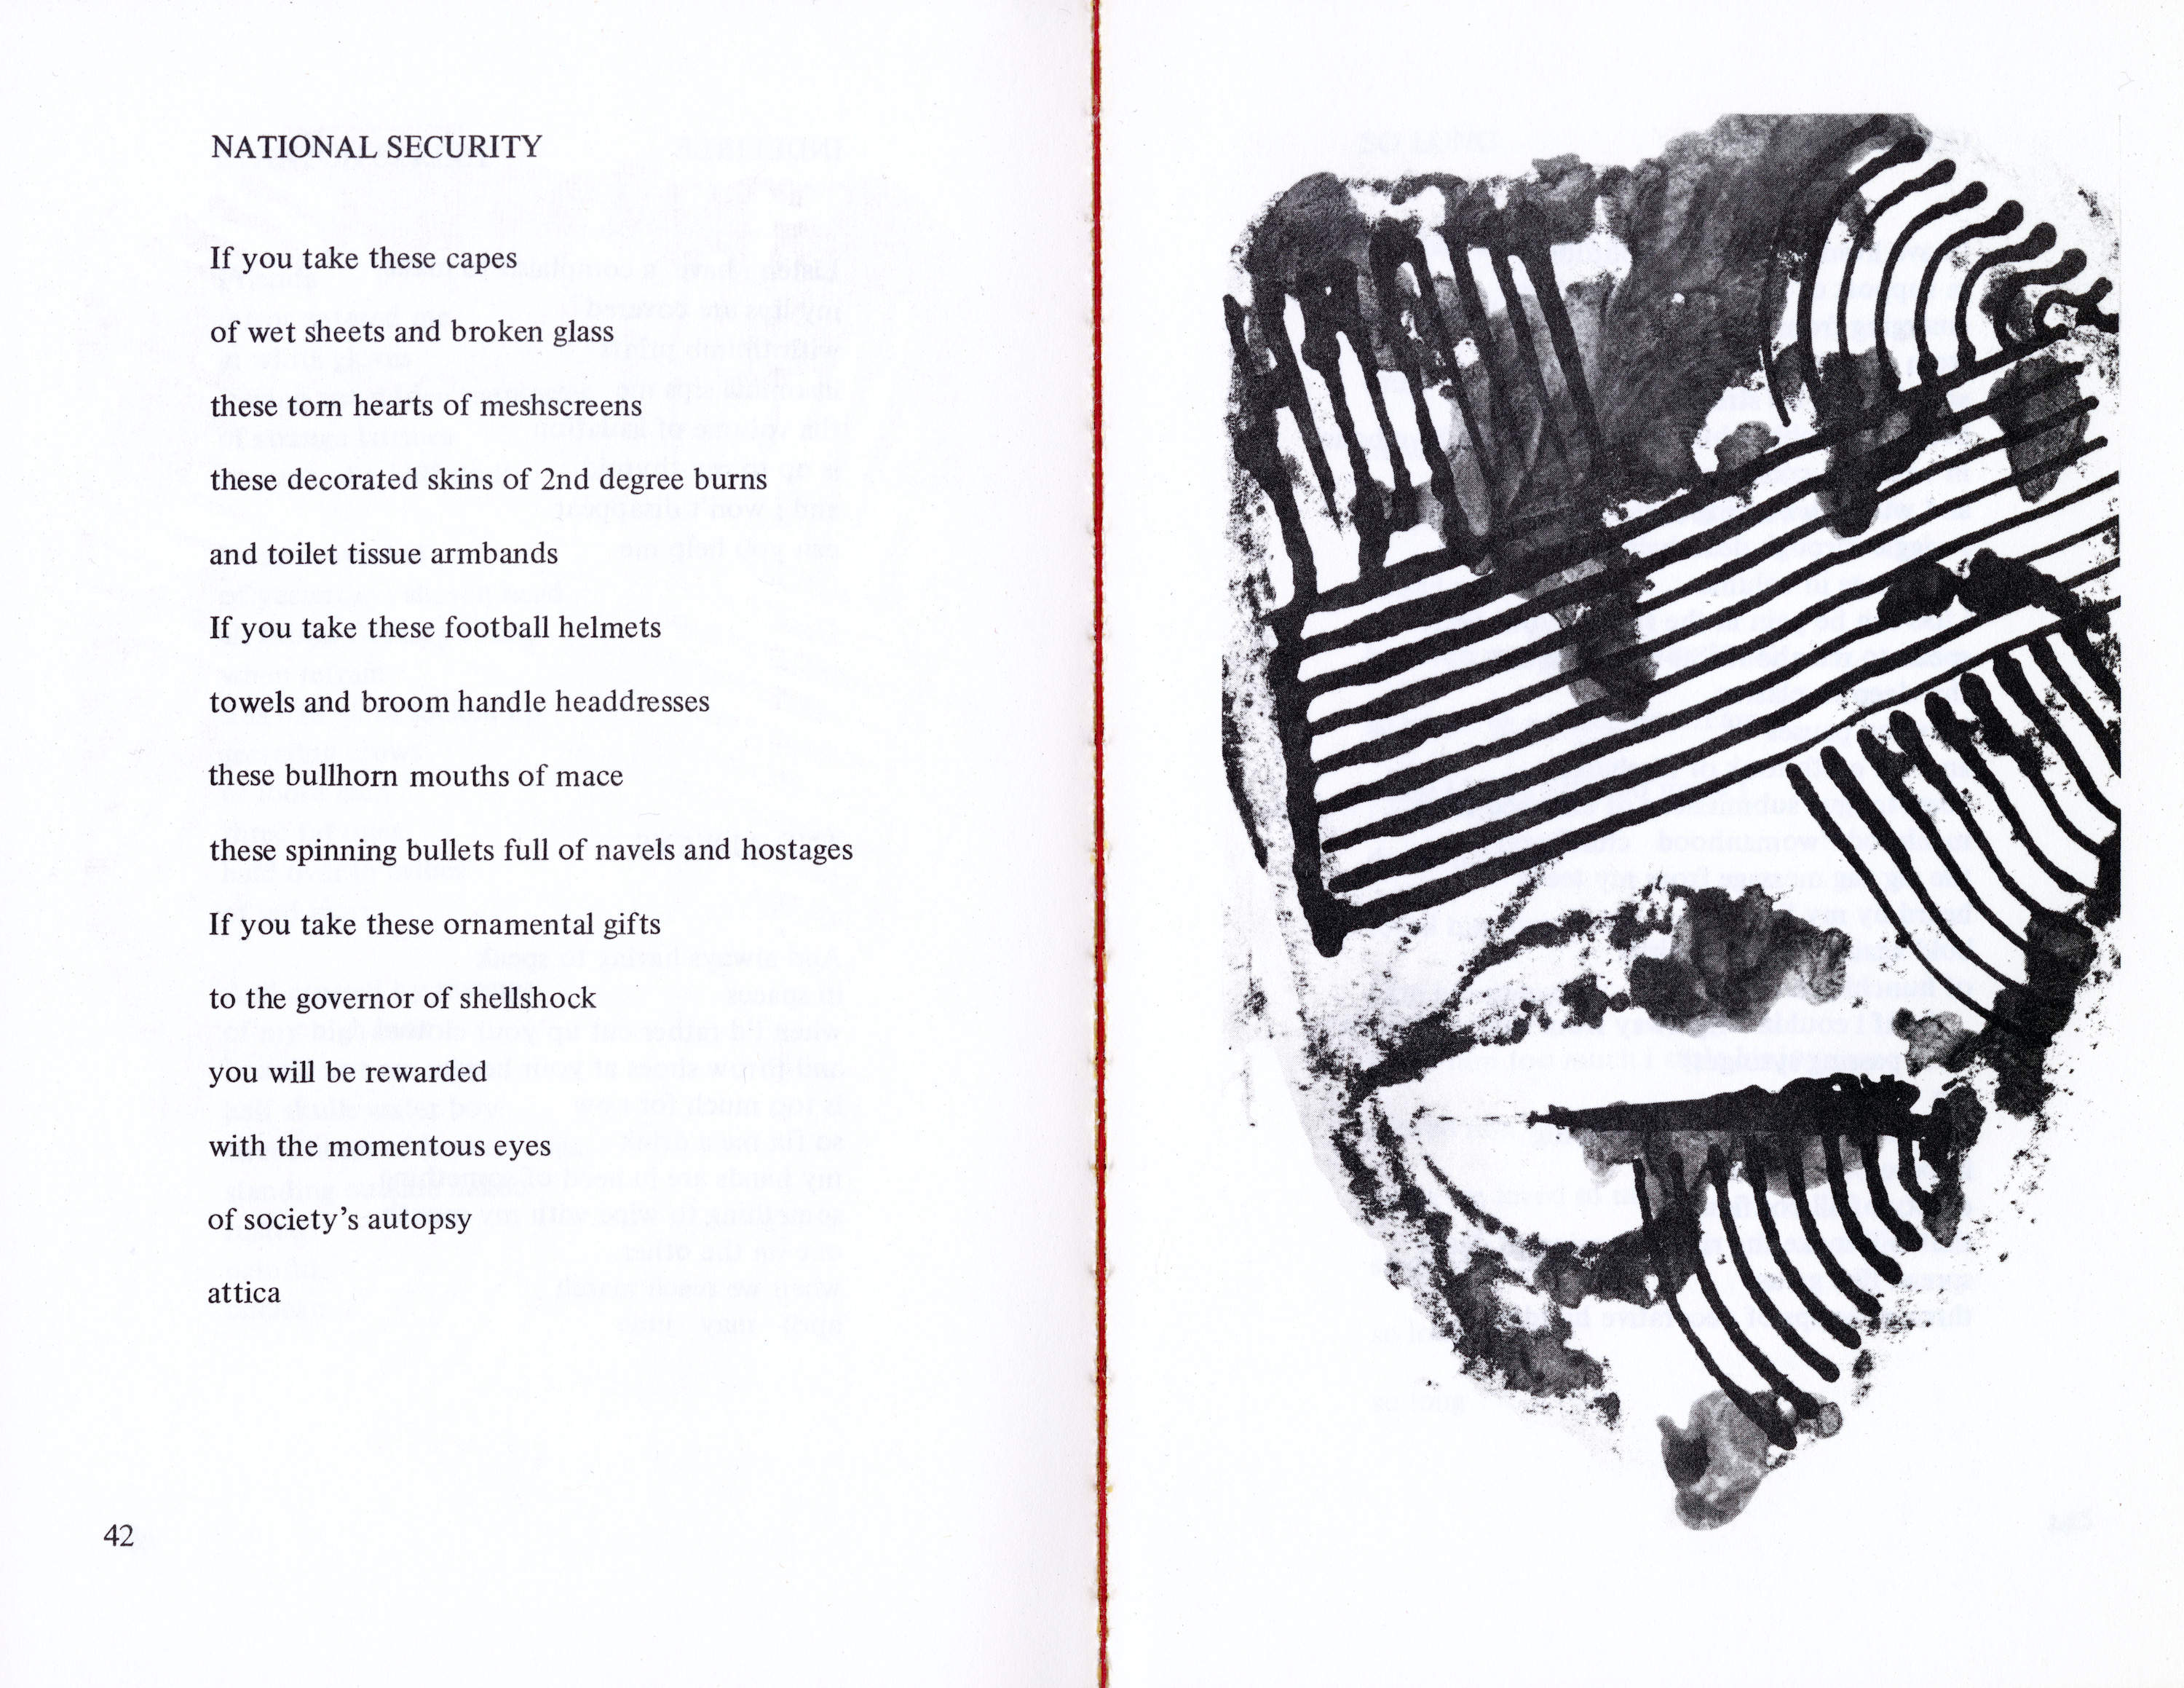 A poem about Attica with an illustration by Melvin Edwards, reproduced from Jayne Cortez's 1975 volume Scarification.